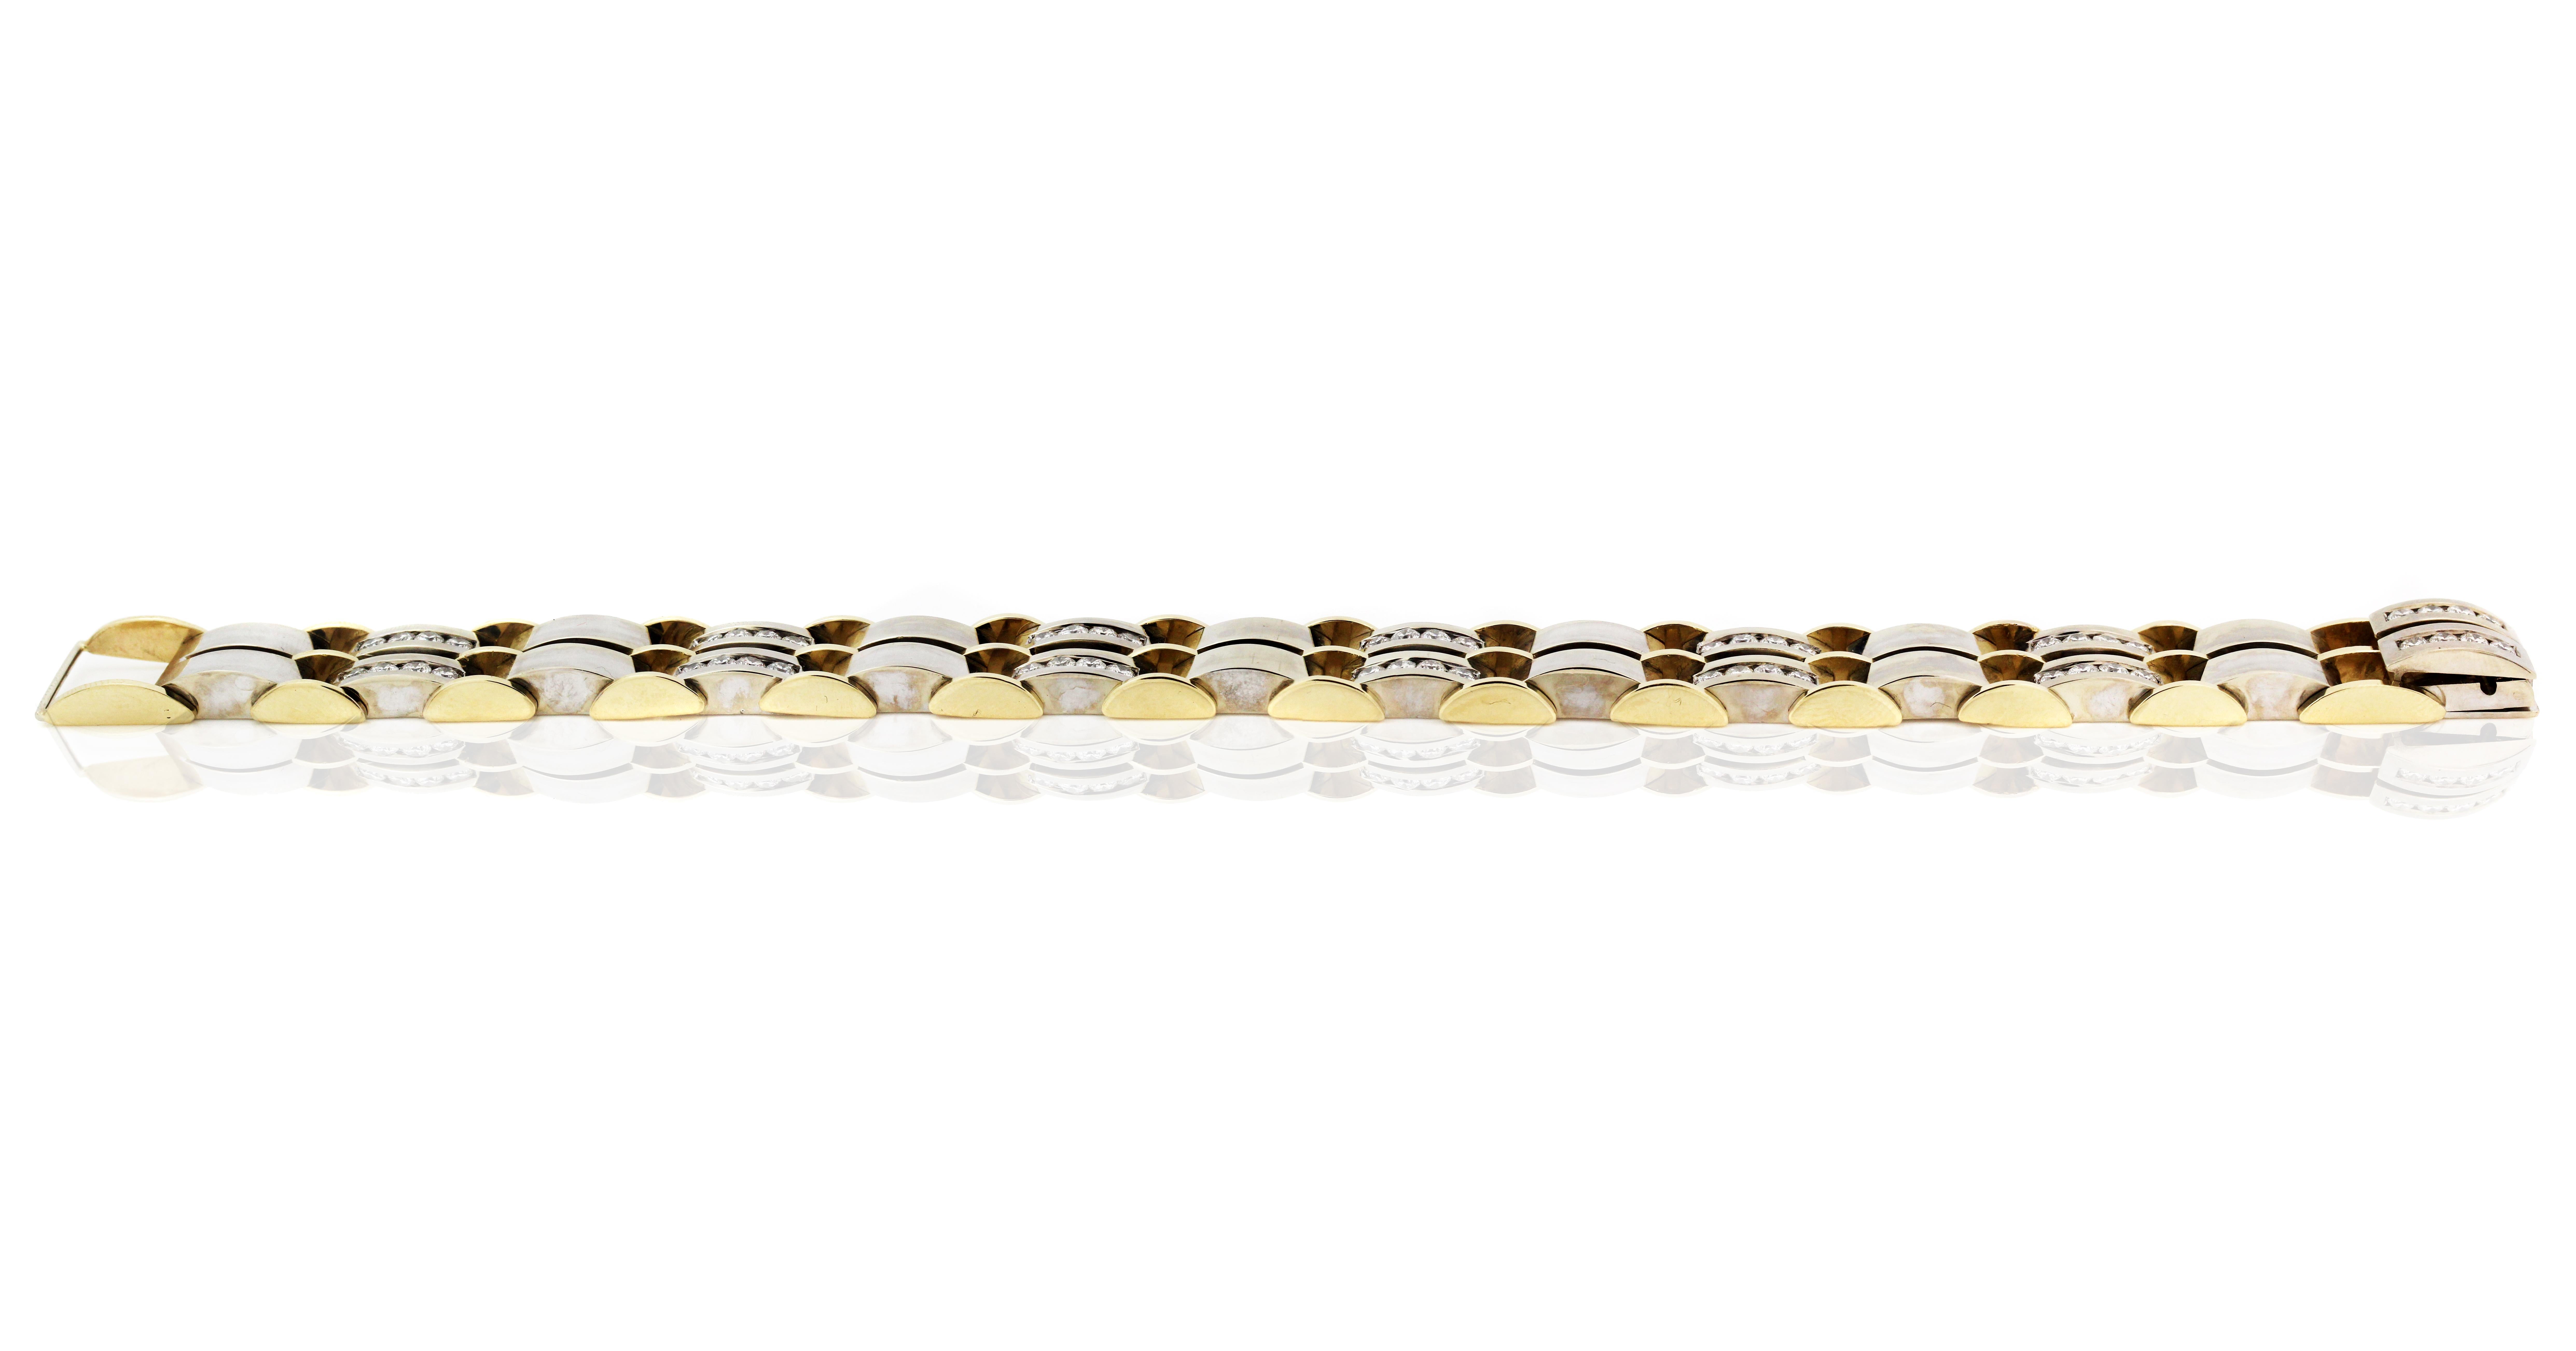 14K Yellow and White Gold Mens Bracelet with Diamonds

4.50 carat G color VS clarity diamonds 

Great weight on the bracelet, 94.2 grams gold

As shown in photos, lock is very secure and clicks right into its place with gorgeous design

9 inches in